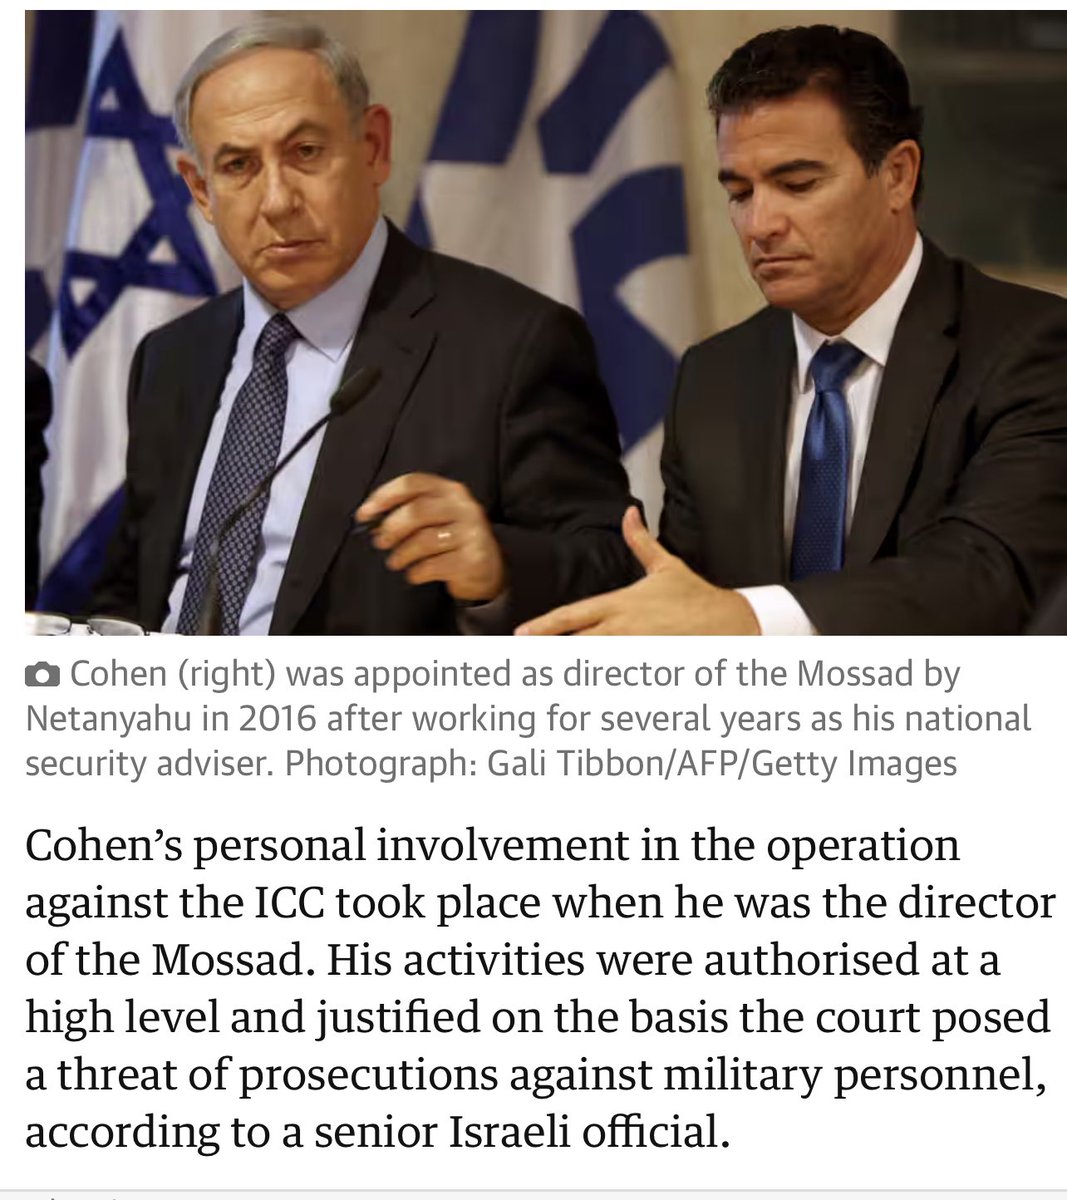 “You don’t want to be getting into things that could compromise your security or that of your family” — Mossad Chief Yossi Cohen to former ICC prosecutor Fatou Bensouda. How Israel waged a war on the ICC for a decade to prevent investigations of Israeli crimes against